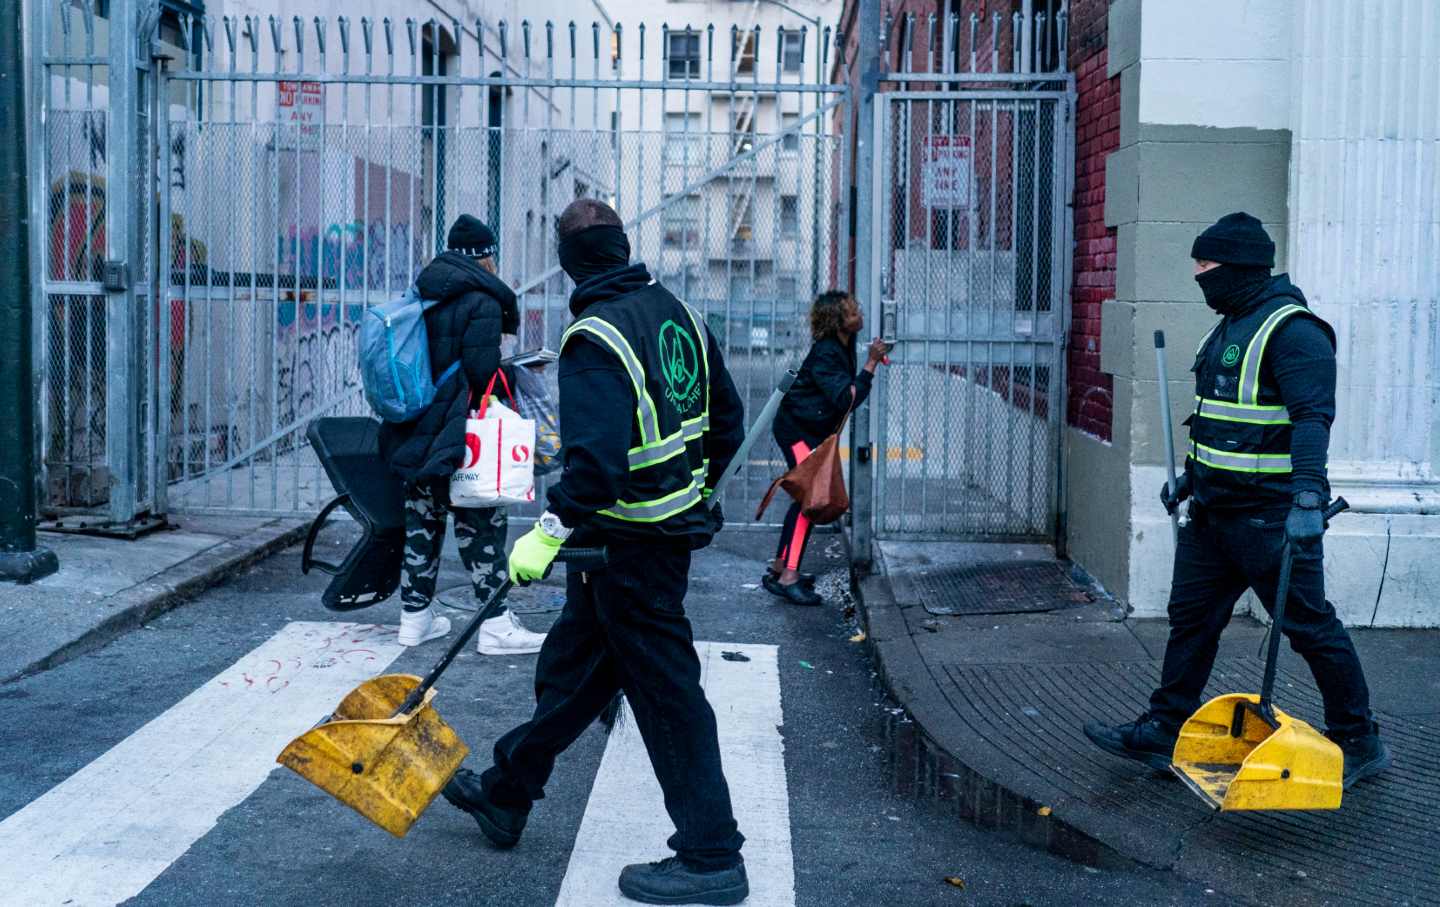 A homeless man and woman quickly pick up their belongings as Urban Alchemy crews begin their daily cleaning of the streets in the Tenderloin neighborhood of San Francisco on January 26, 2022.